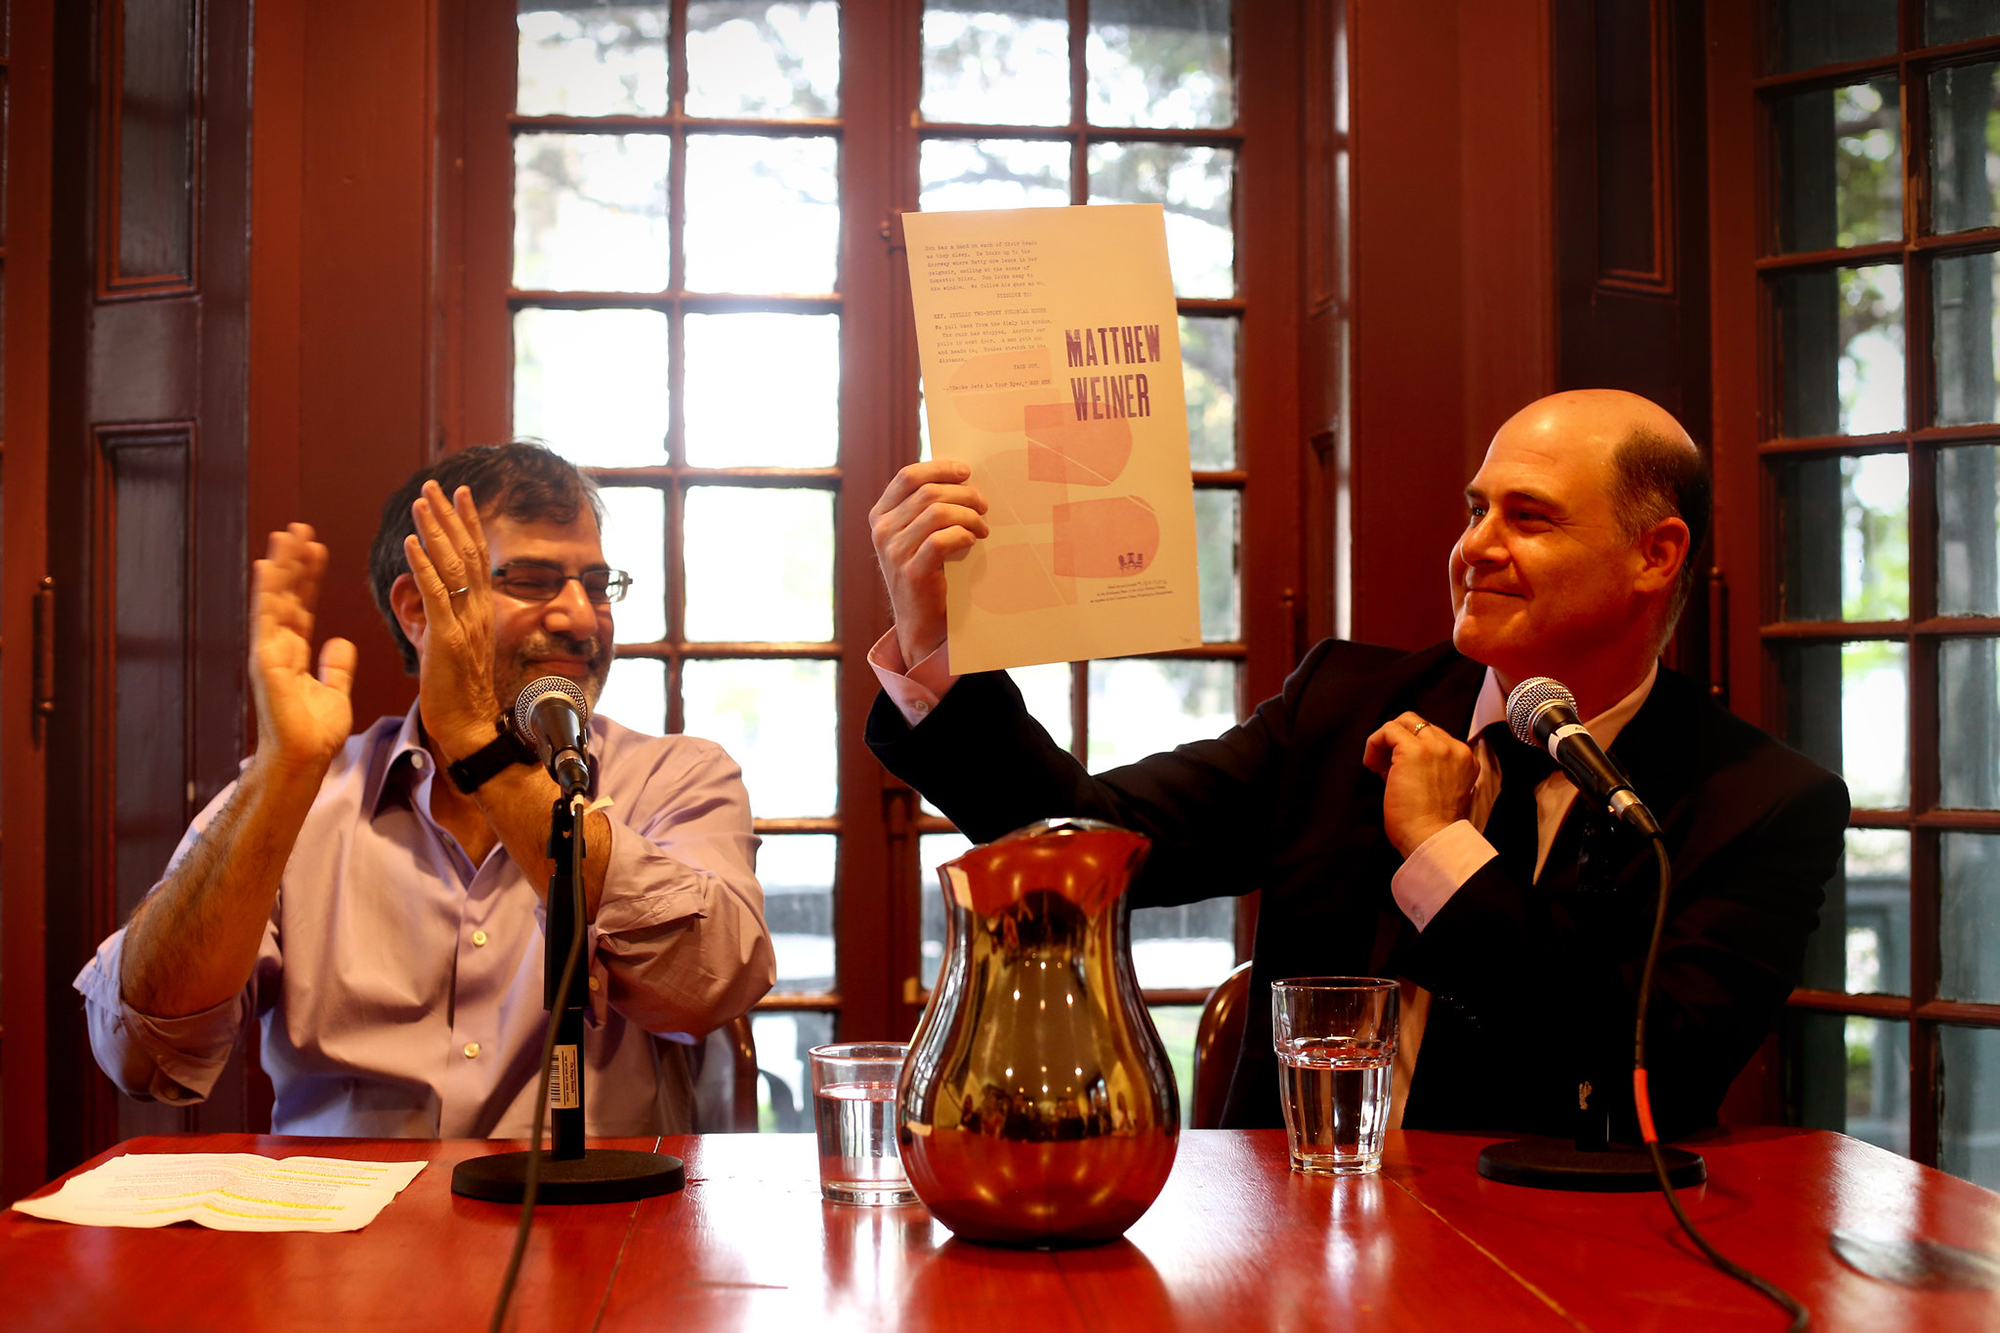 Al Filreis claps, seated next to Matthew Weiner, who is holding up a flyer, at the Kelly Writers House.